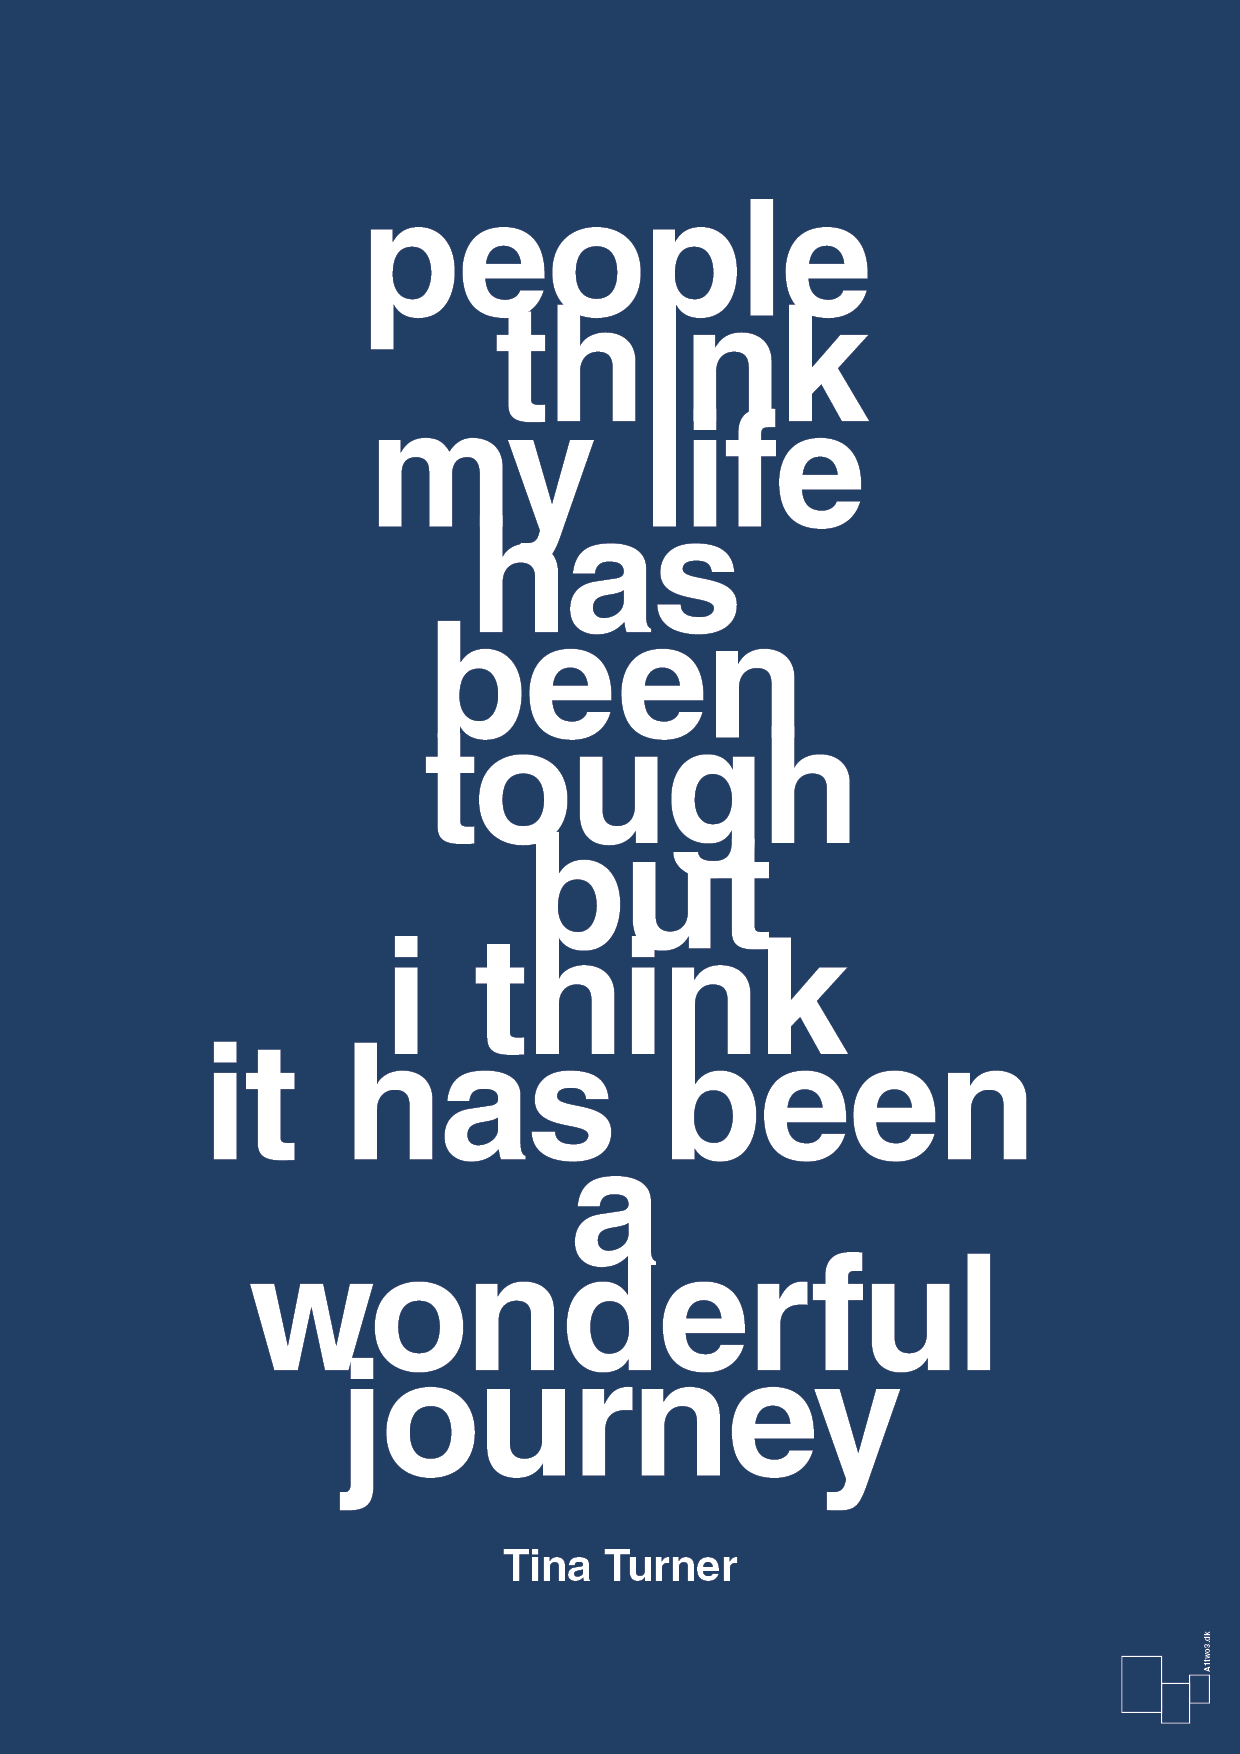 people think my life has been tough but I think it’s been a wonderful journey - Plakat med Citater i Lapis Blue